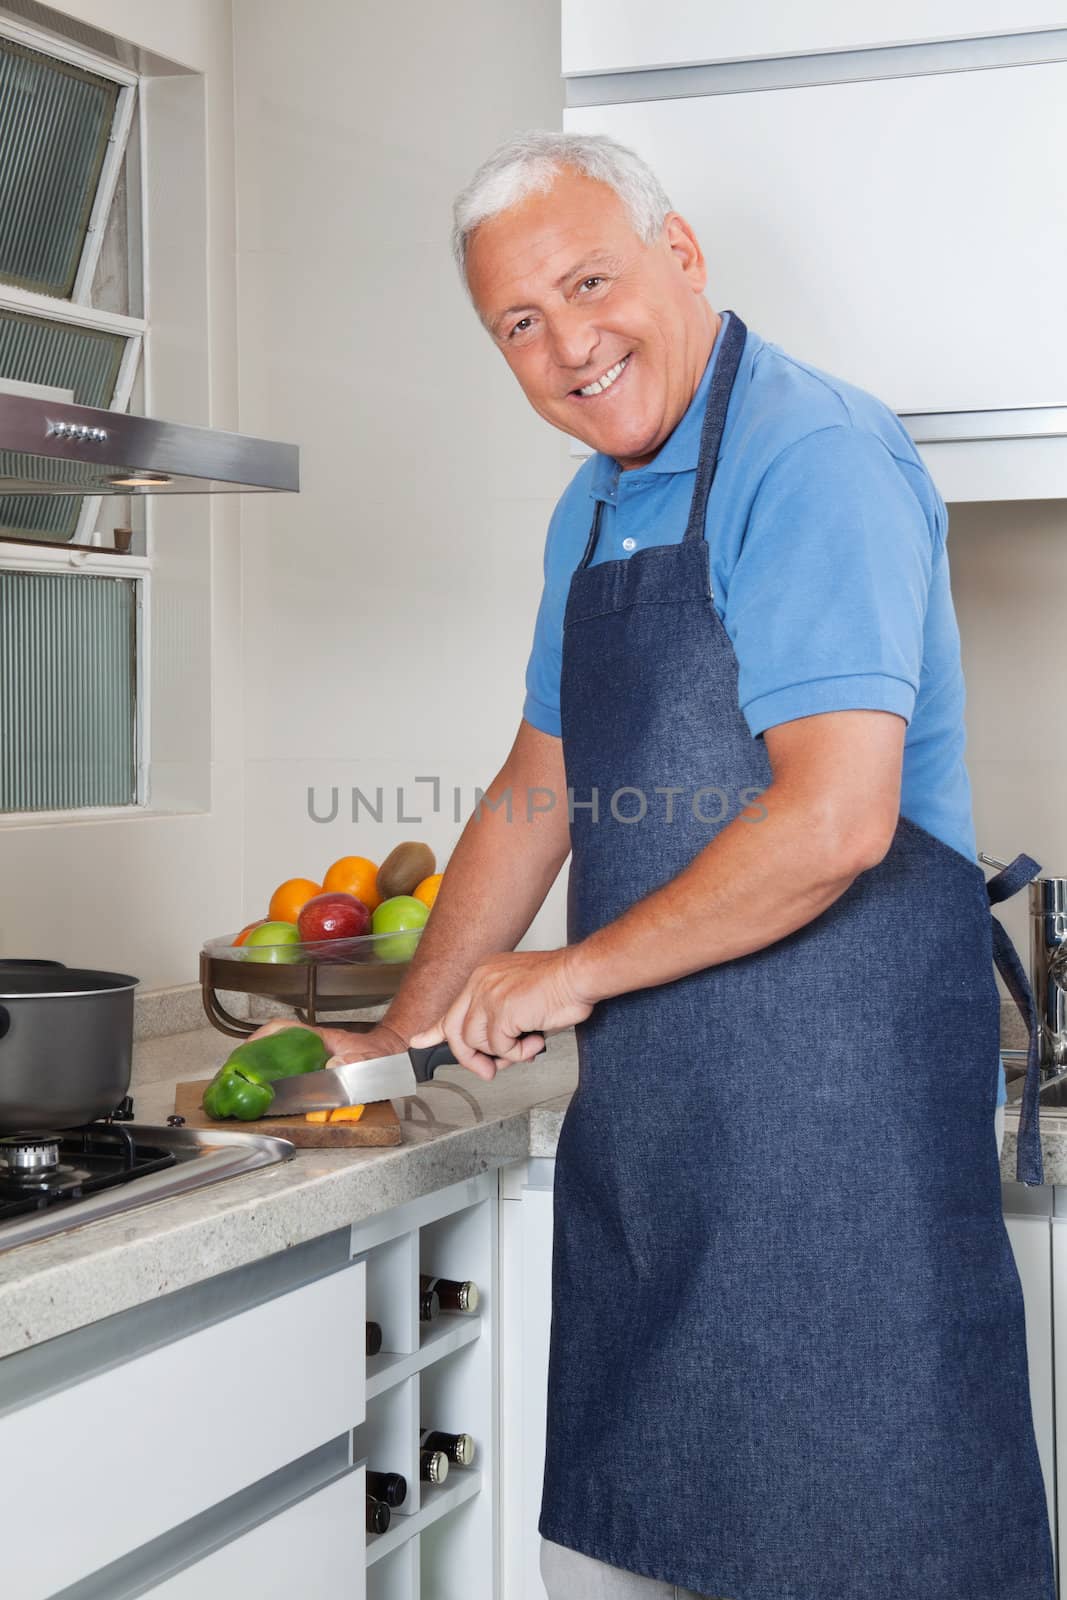 Portrait of smiling senior man cutting vegetables at kitchen counter